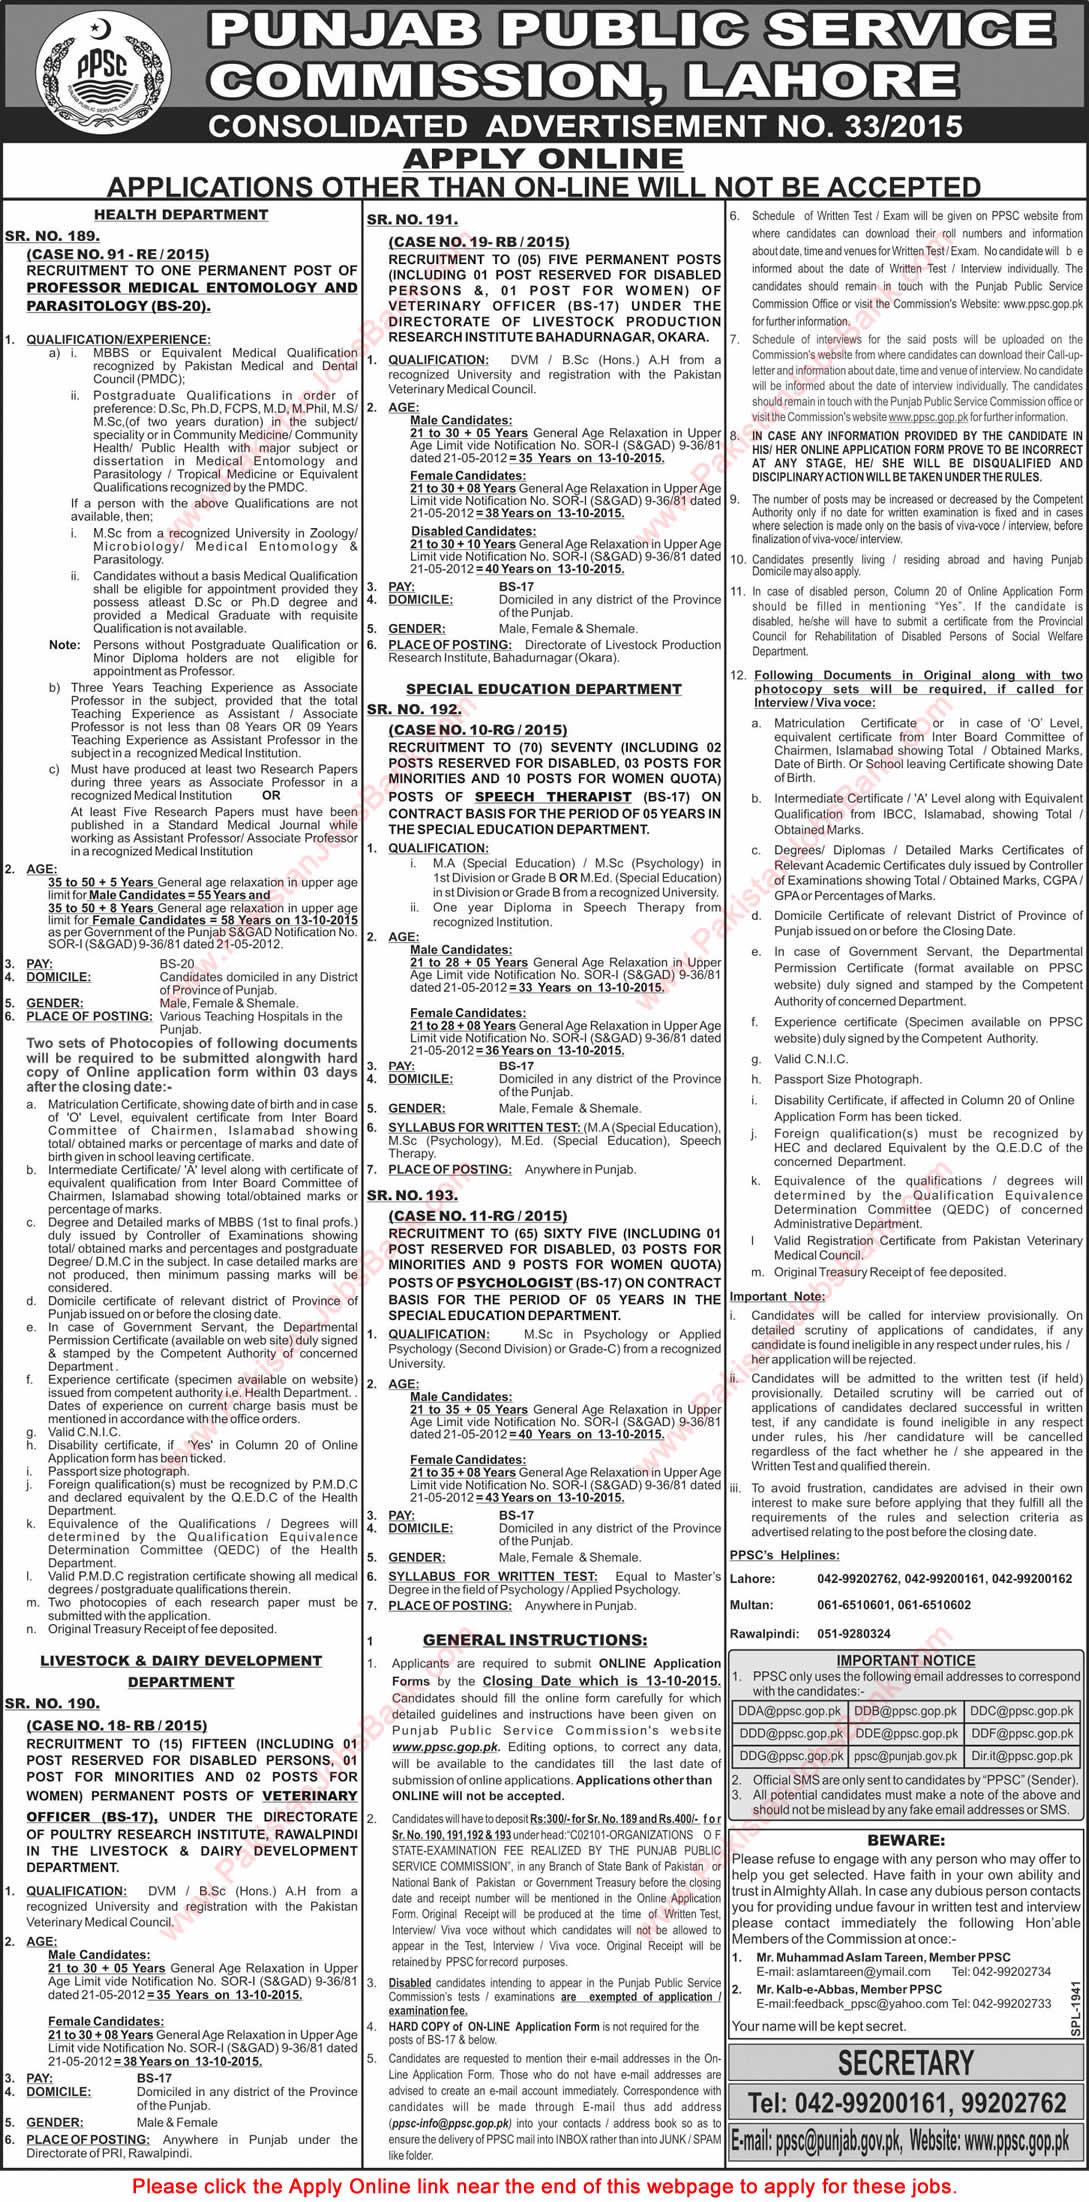 PPSC Jobs September 2015 Consolidated Advertisement No 33/2015 Online Application Form Latest